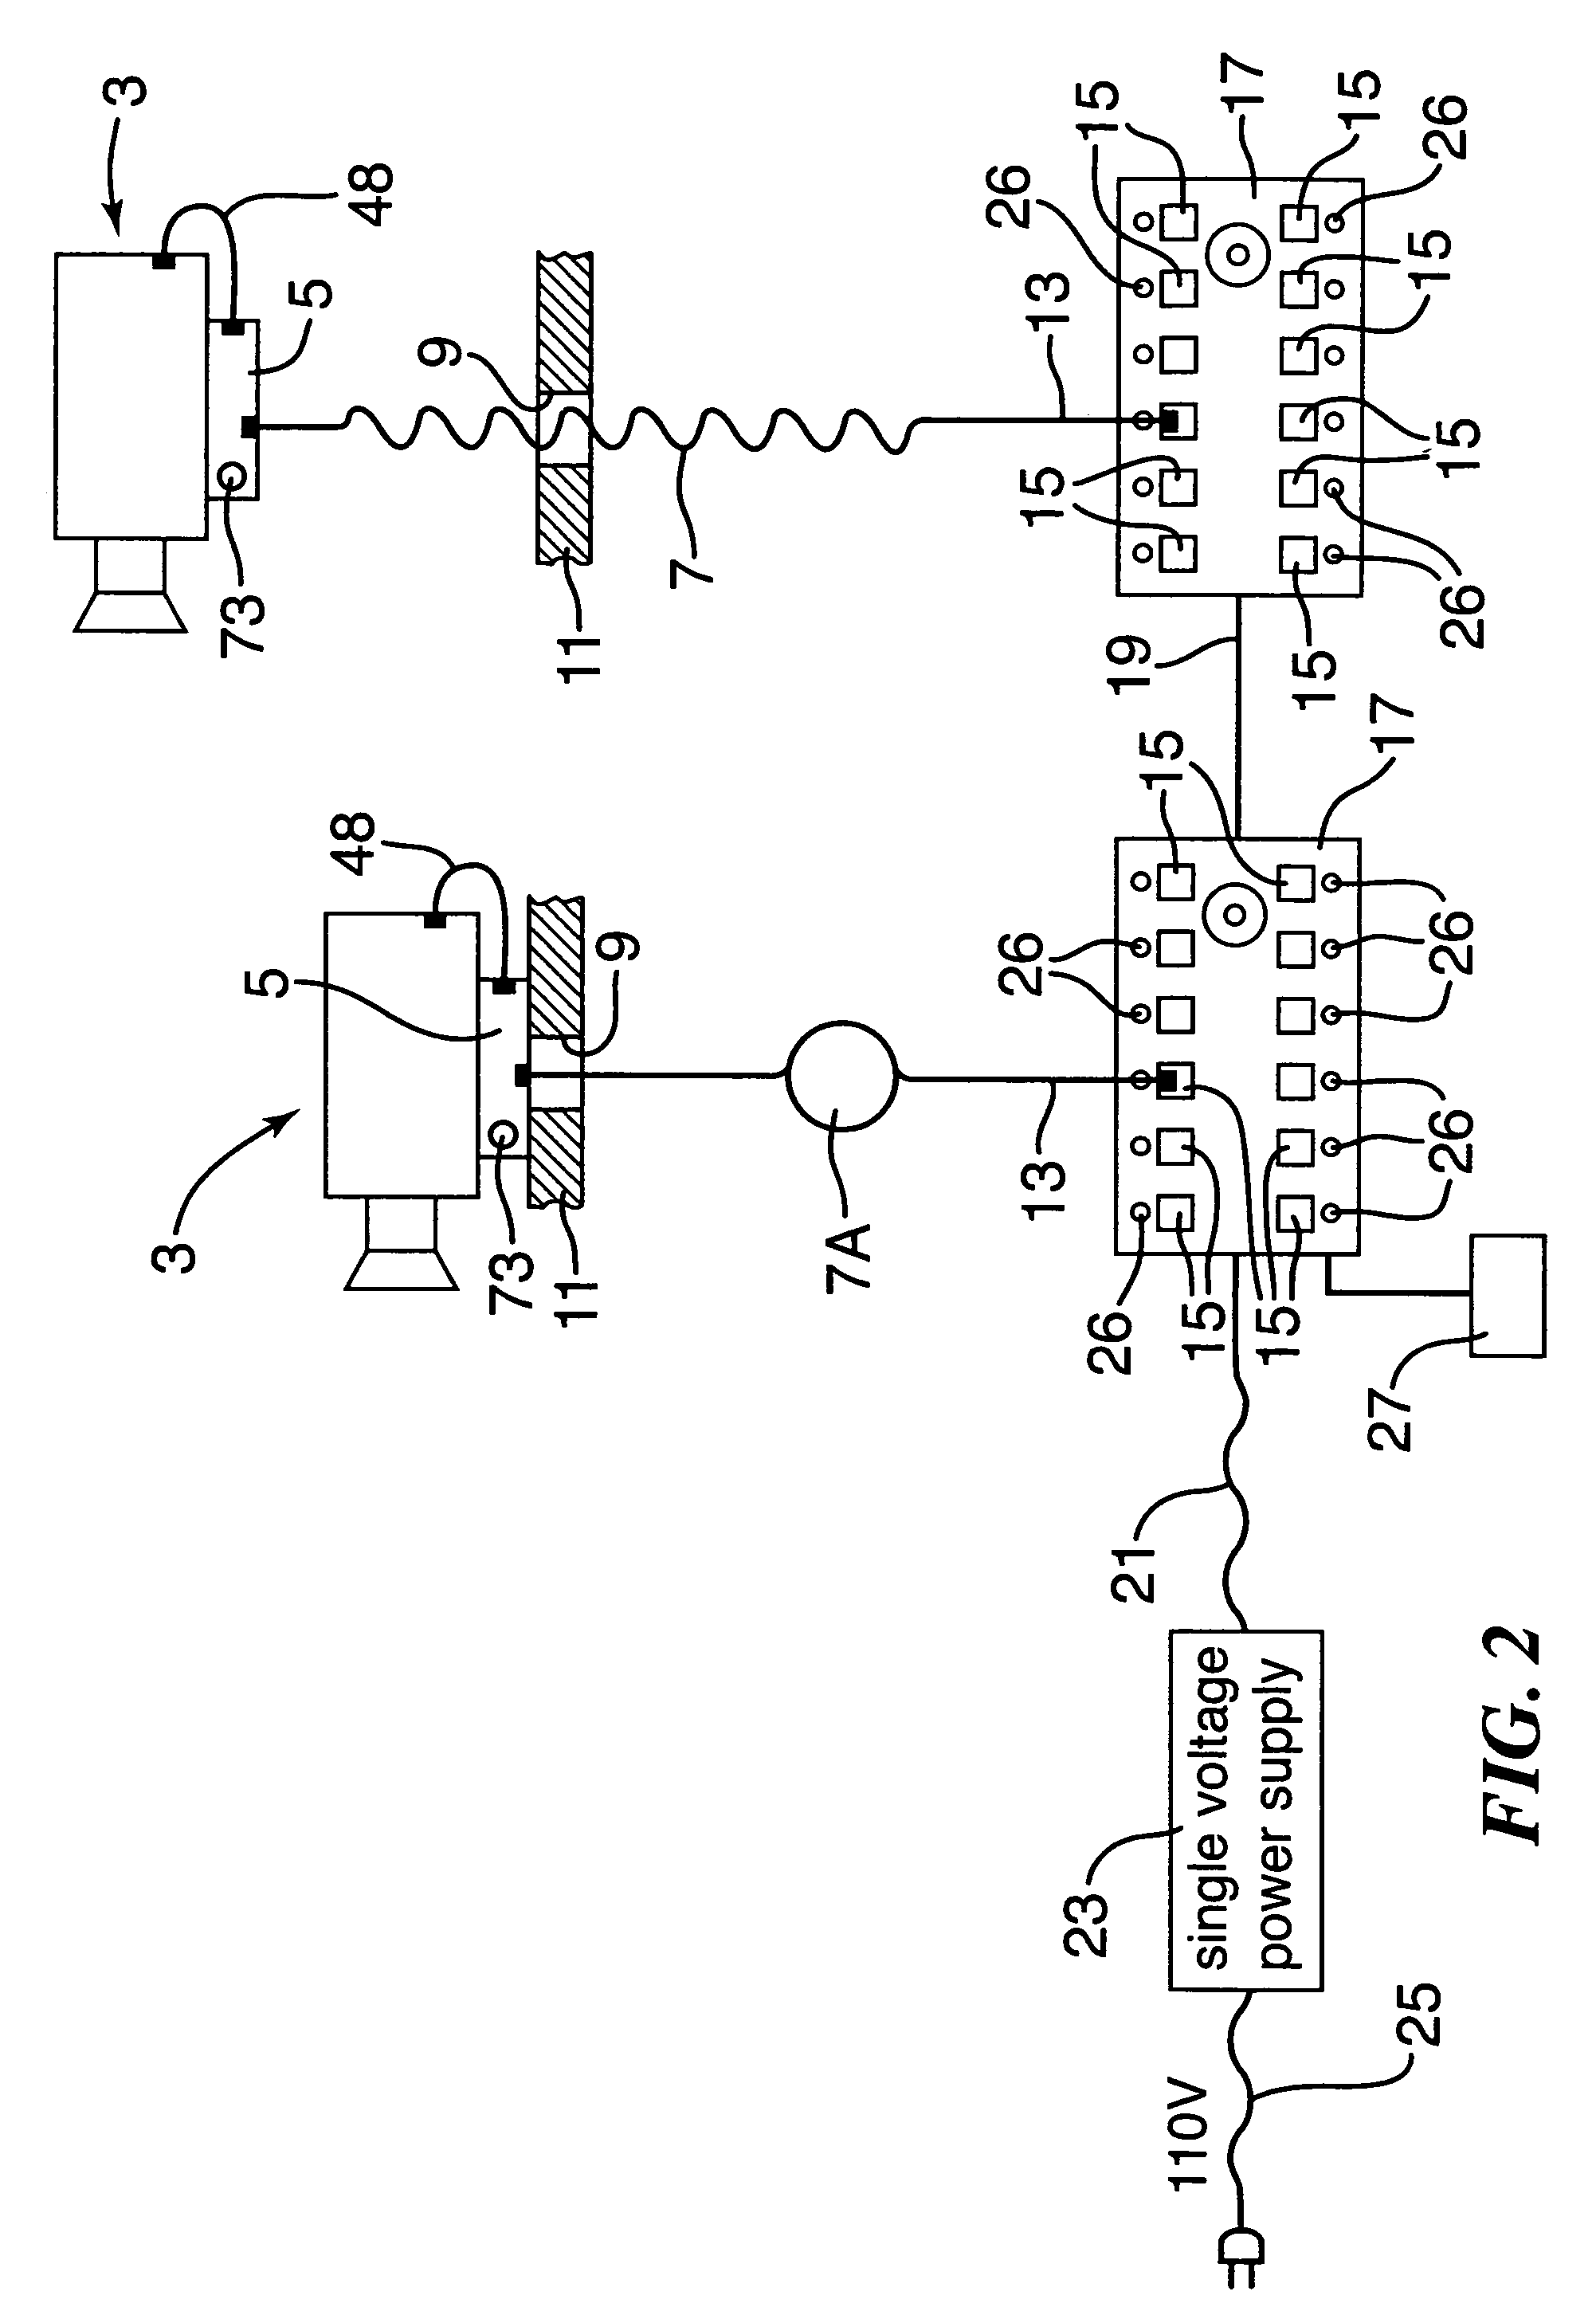 Electronic device display system and method